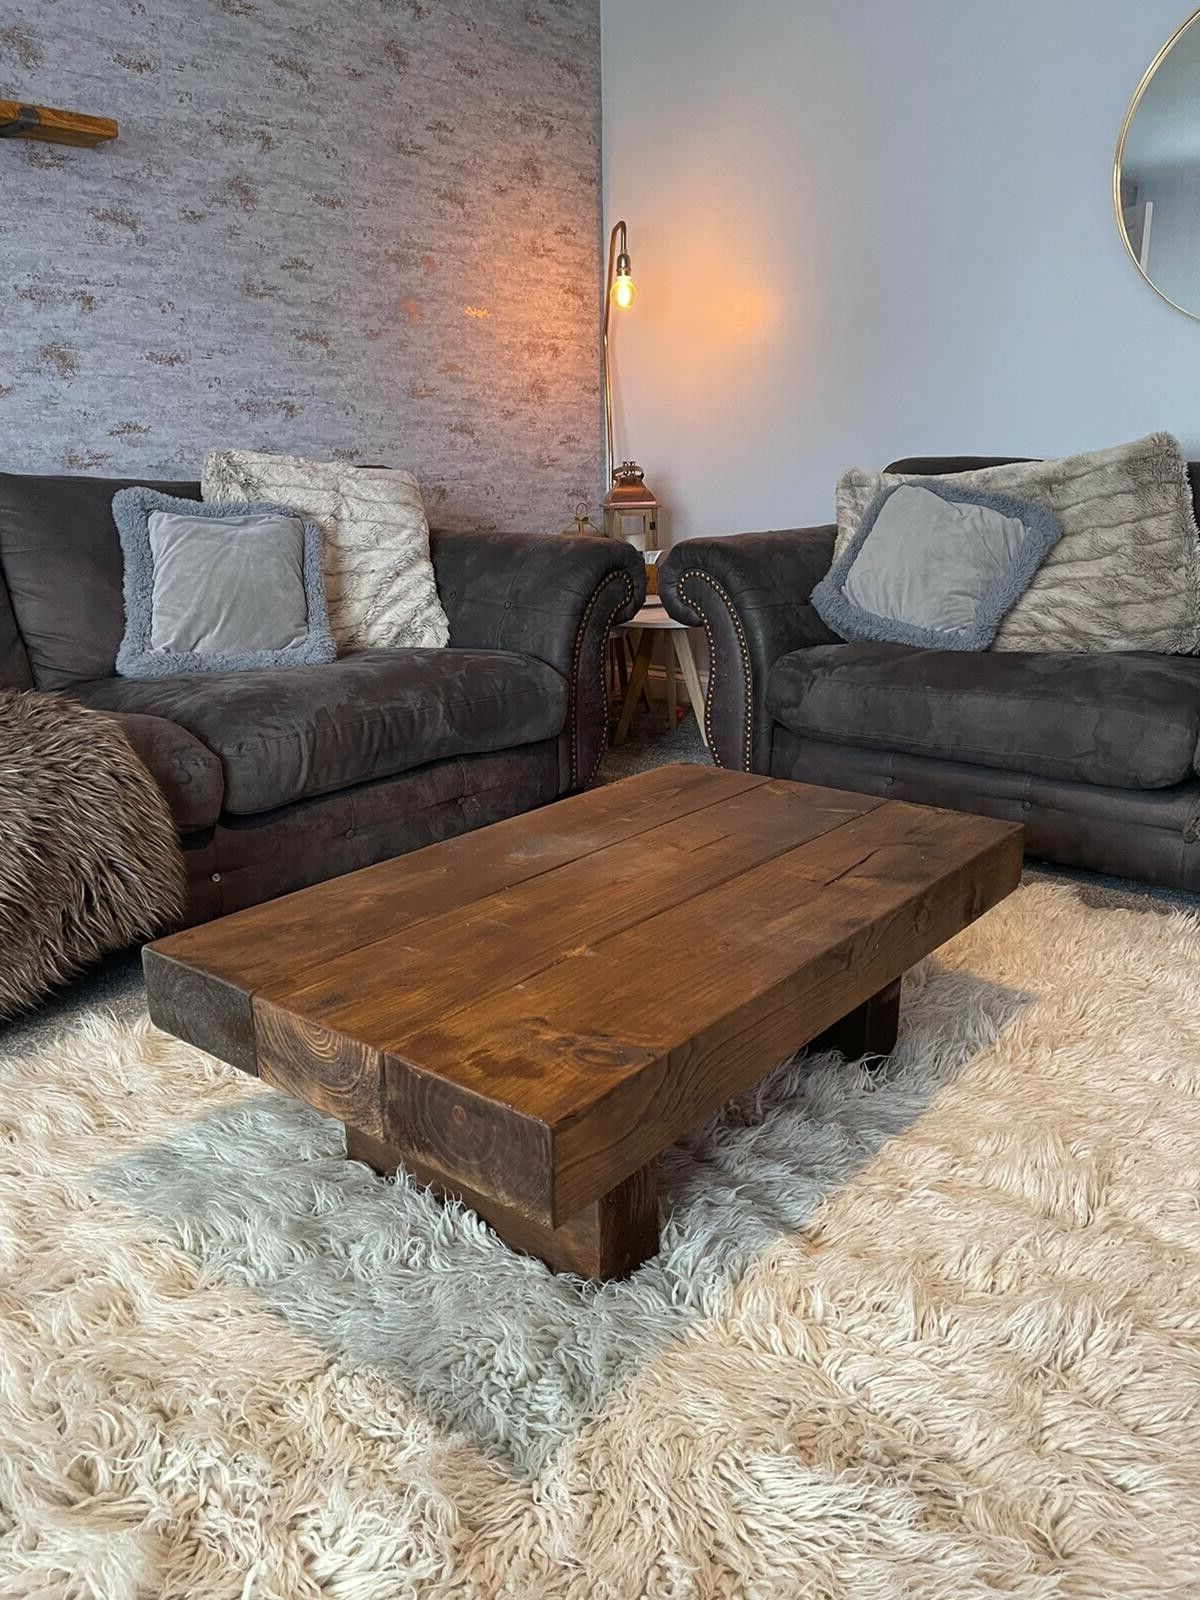 Ebay Within Rustic Coffee Tables (View 7 of 10)